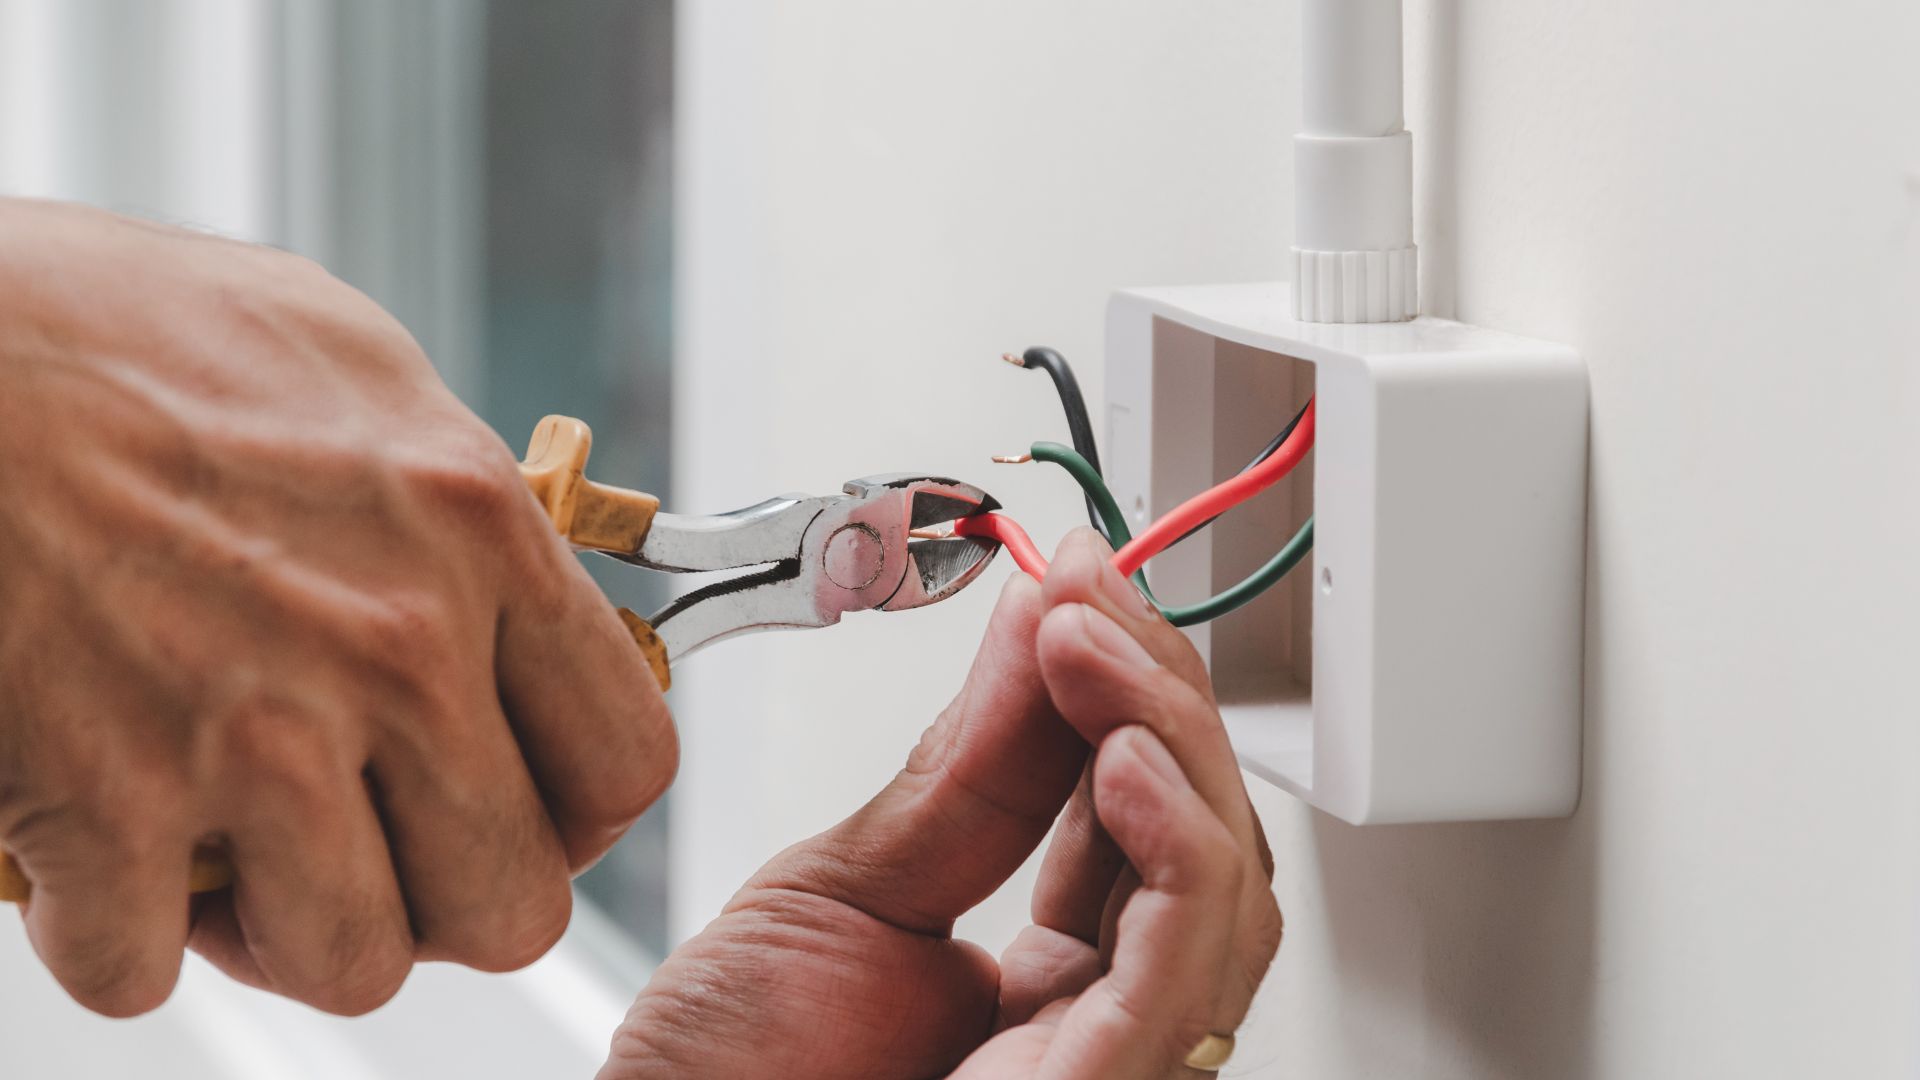 Electricians' Outlet and Plug Installation and Replacement Services